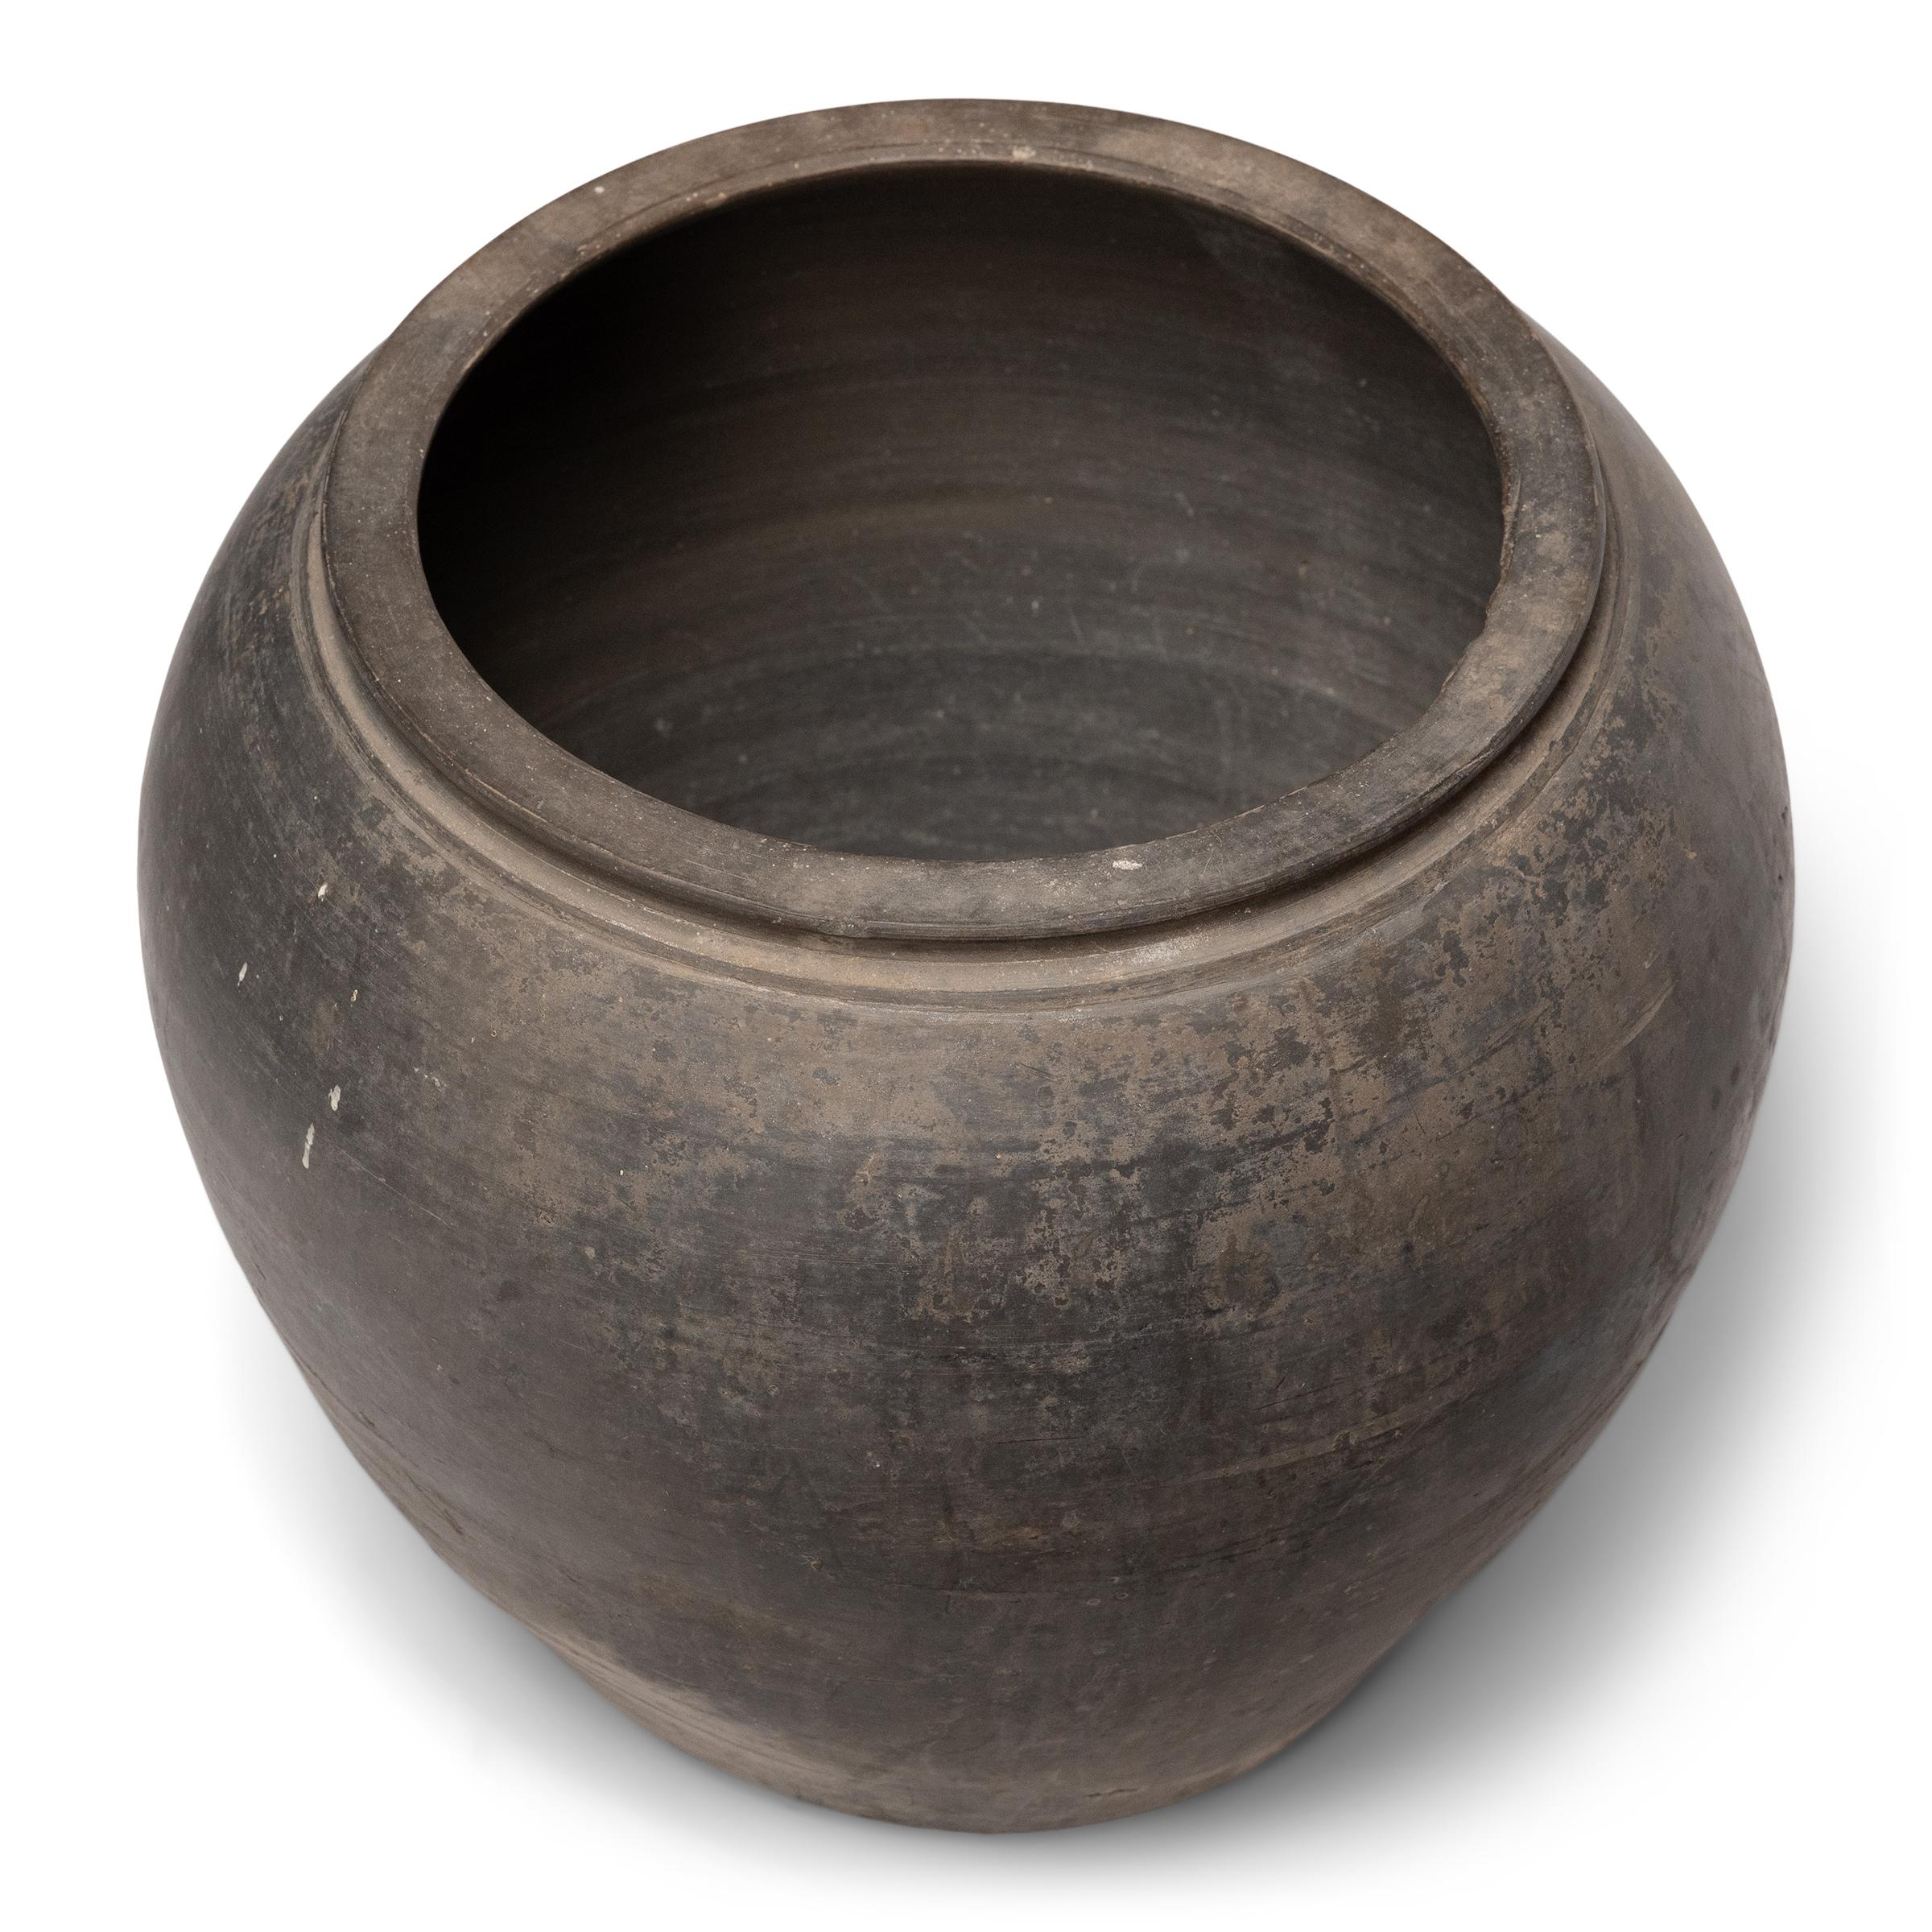 Sculpted during the early 20th century in China's Shanxi province, this terra cotta vessel has a smoky taupe exterior with balanced proportions and a beautifully irregular unglazed surface. Charged with the humble task of storing dry goods, this